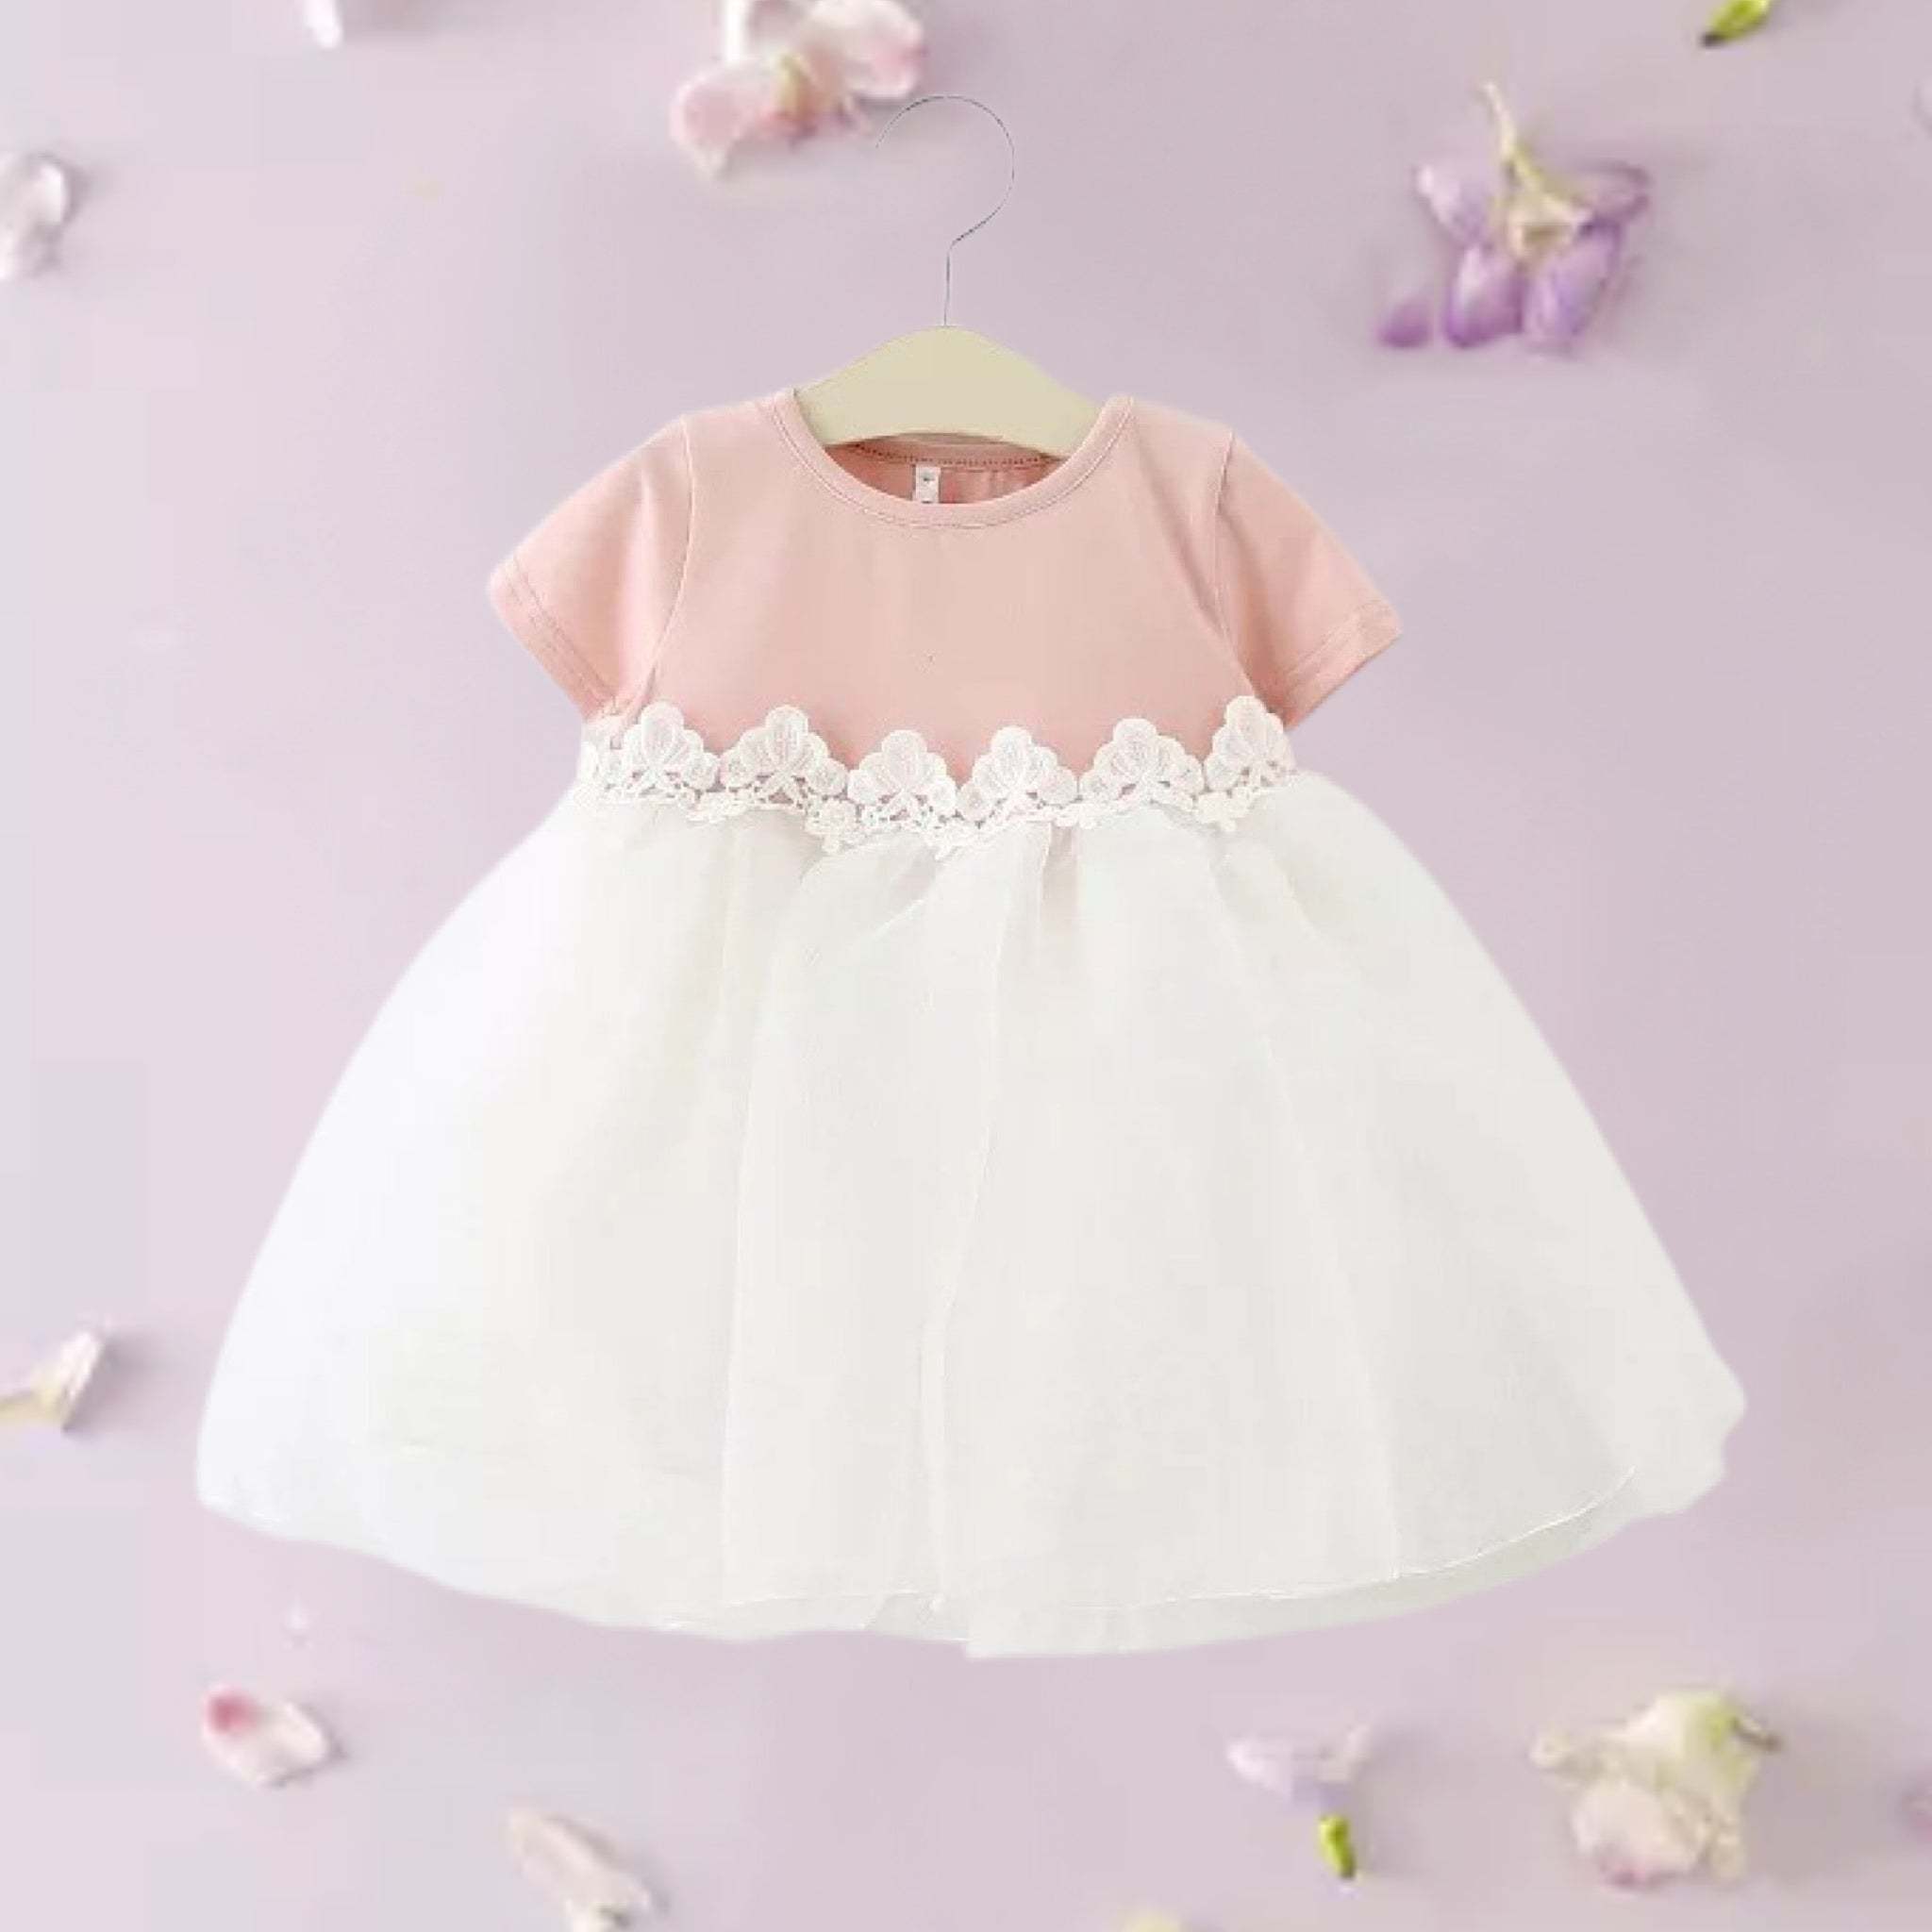 Baby Toddler Girls Easter Dress Tutu Princess Style Lace & Tulle Bowknot